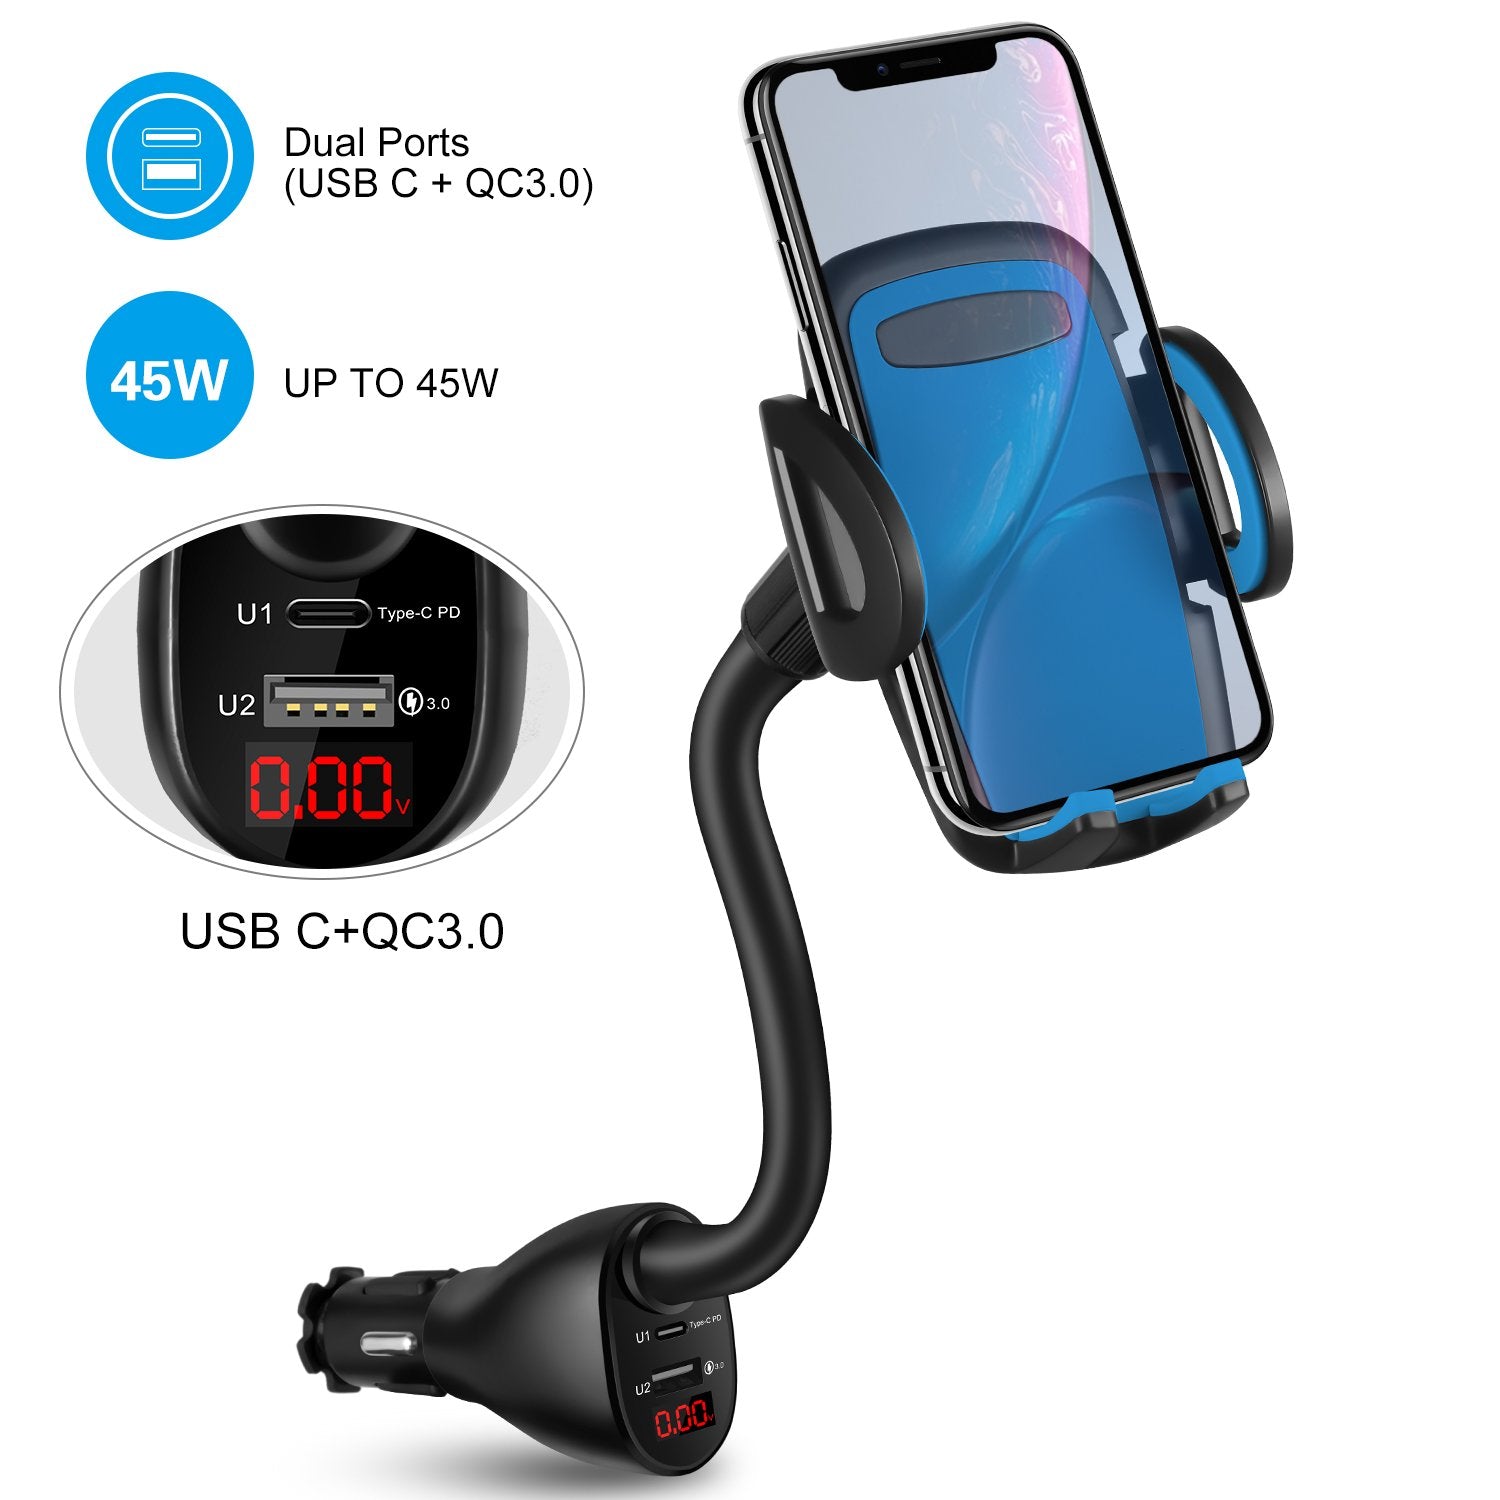 WALOTAR USB C PD Car Cigarette Lighter iPhone Mount Holder- Fast Car Charger 45W Power Delivery Dual Port(USB TypeC+QC3.0),Adjustable Cell Phone Cradle with USB C to Lightning Cable